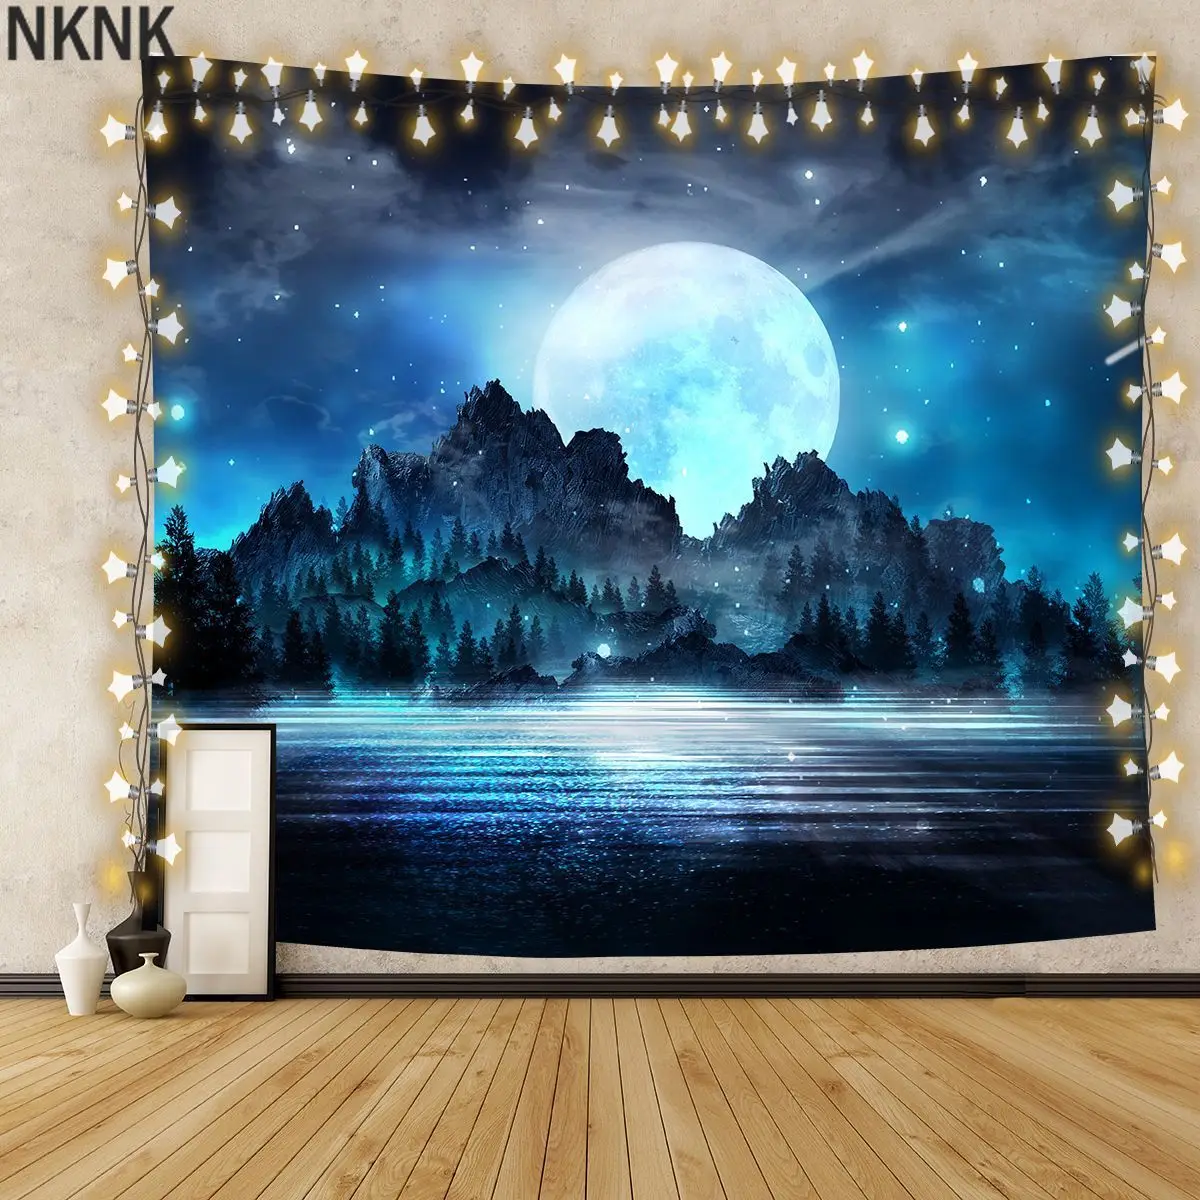 

Galaxy Moon Tapestry Wall Hanging Forest Tree Landscape Hippie Psychedelic Tapiz Starry Sky Dorm Home Decor Mandala Wall Carpet